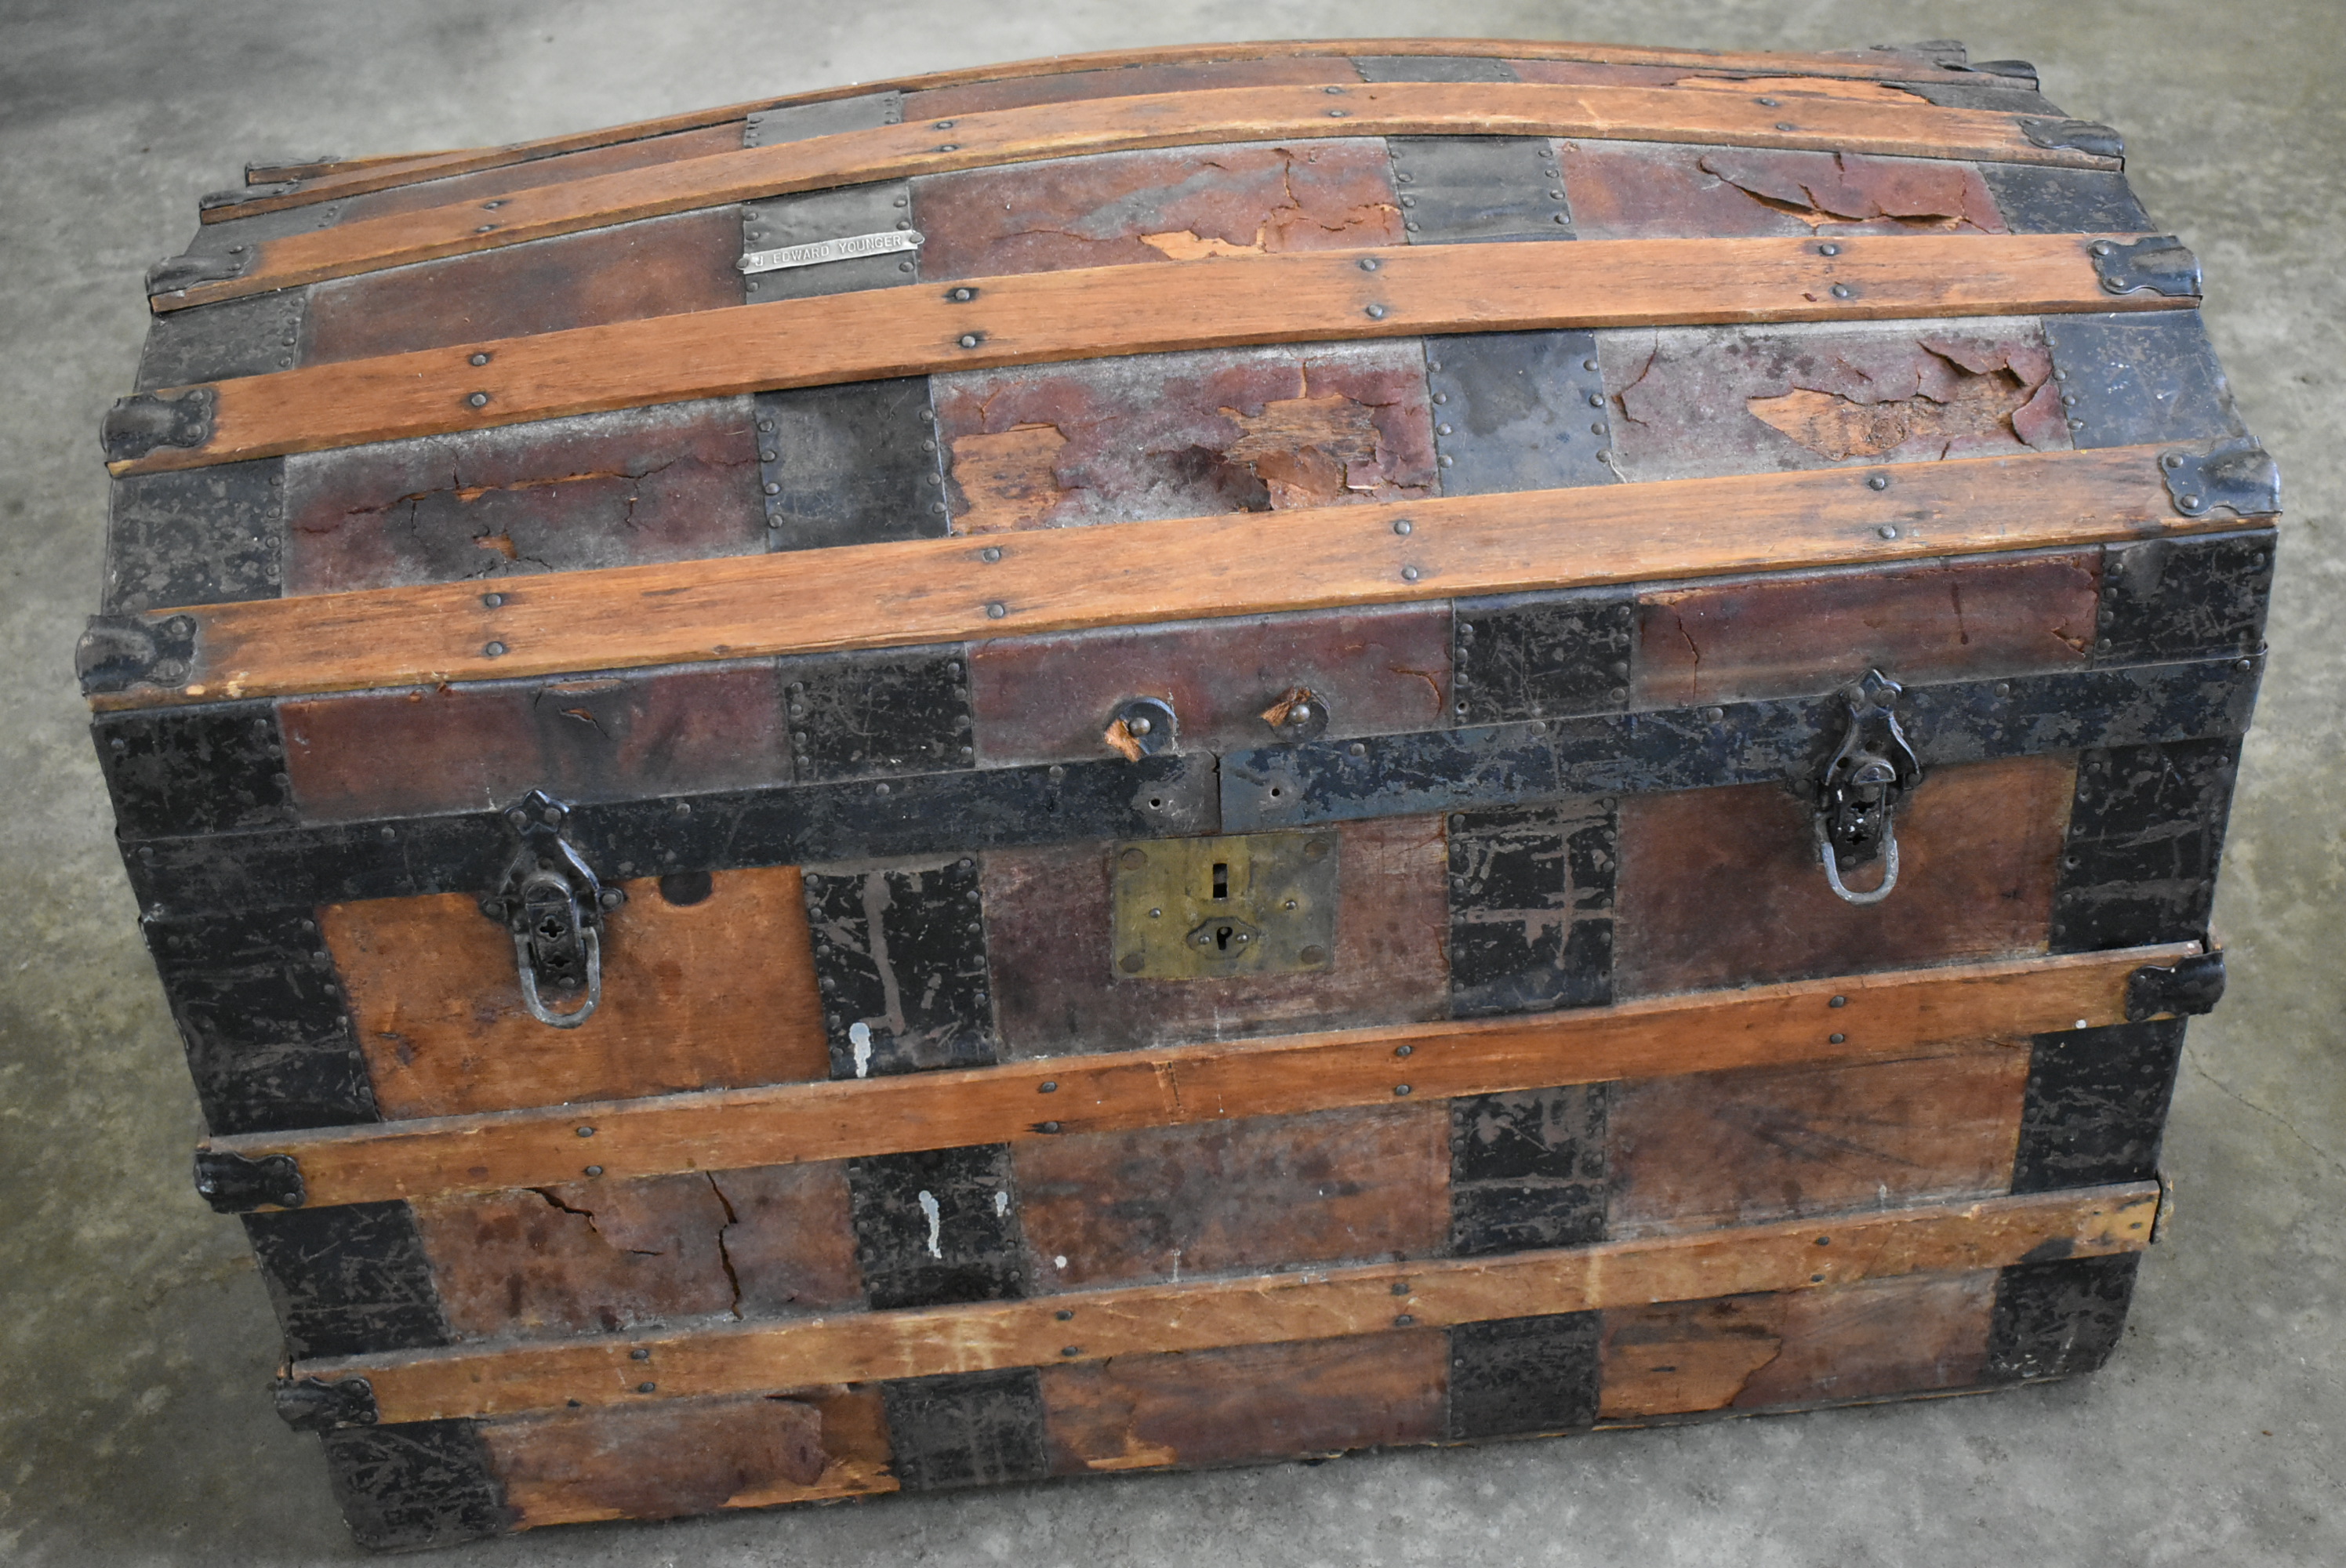 How To Determine The Age of An Antique Steamer Trunk 